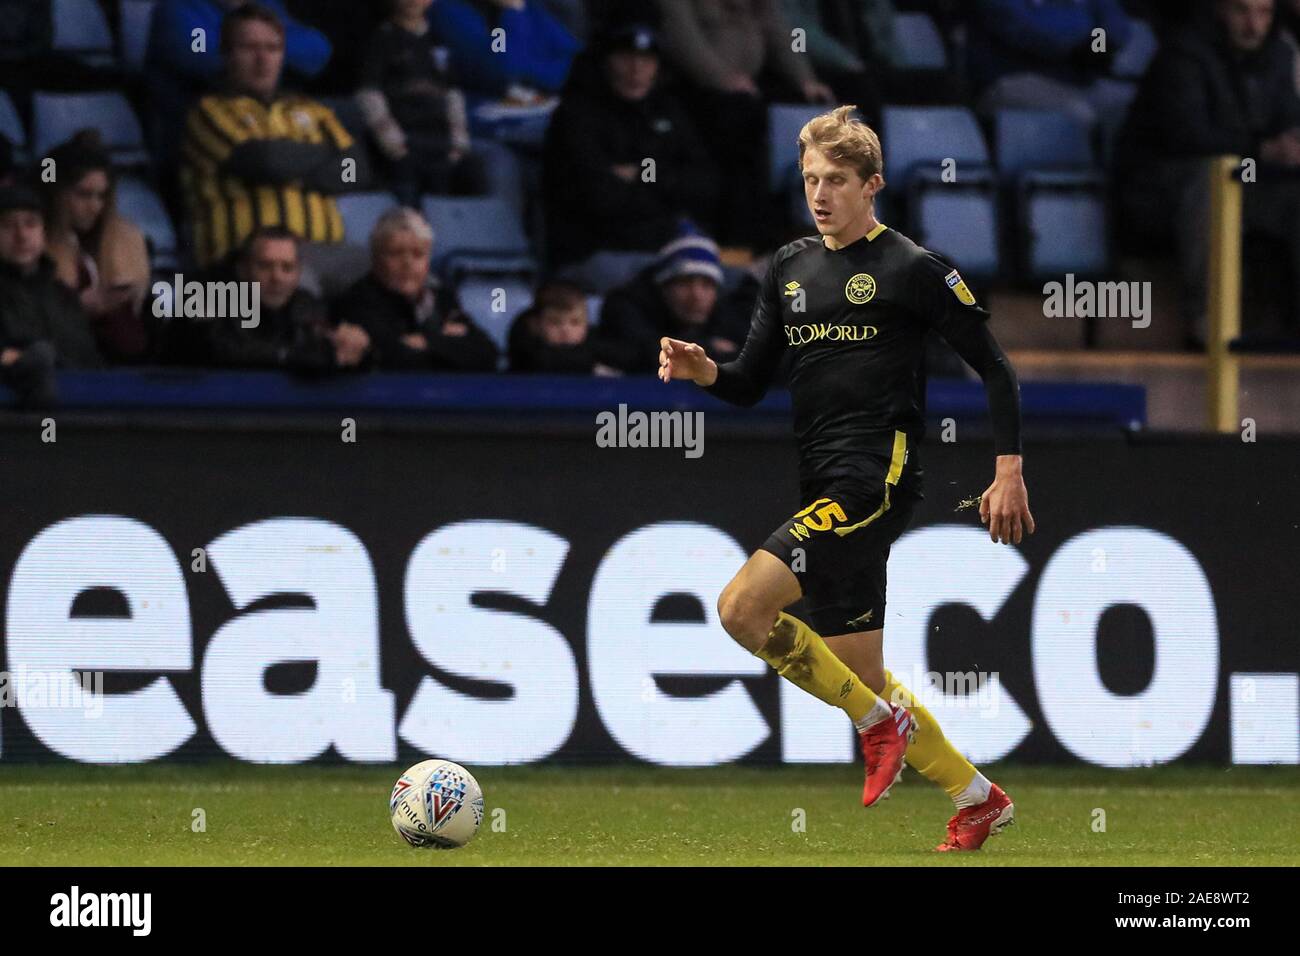 7th December 2019, Hillsborough, Sheffield, England; Sky Bet Championship, Sheffield Wednesday v Brentford : Mads Roerslev Rasmussen (35) of Brentford makes a break down the wing  Credit: Mark Cosgrove/News Images Stock Photo